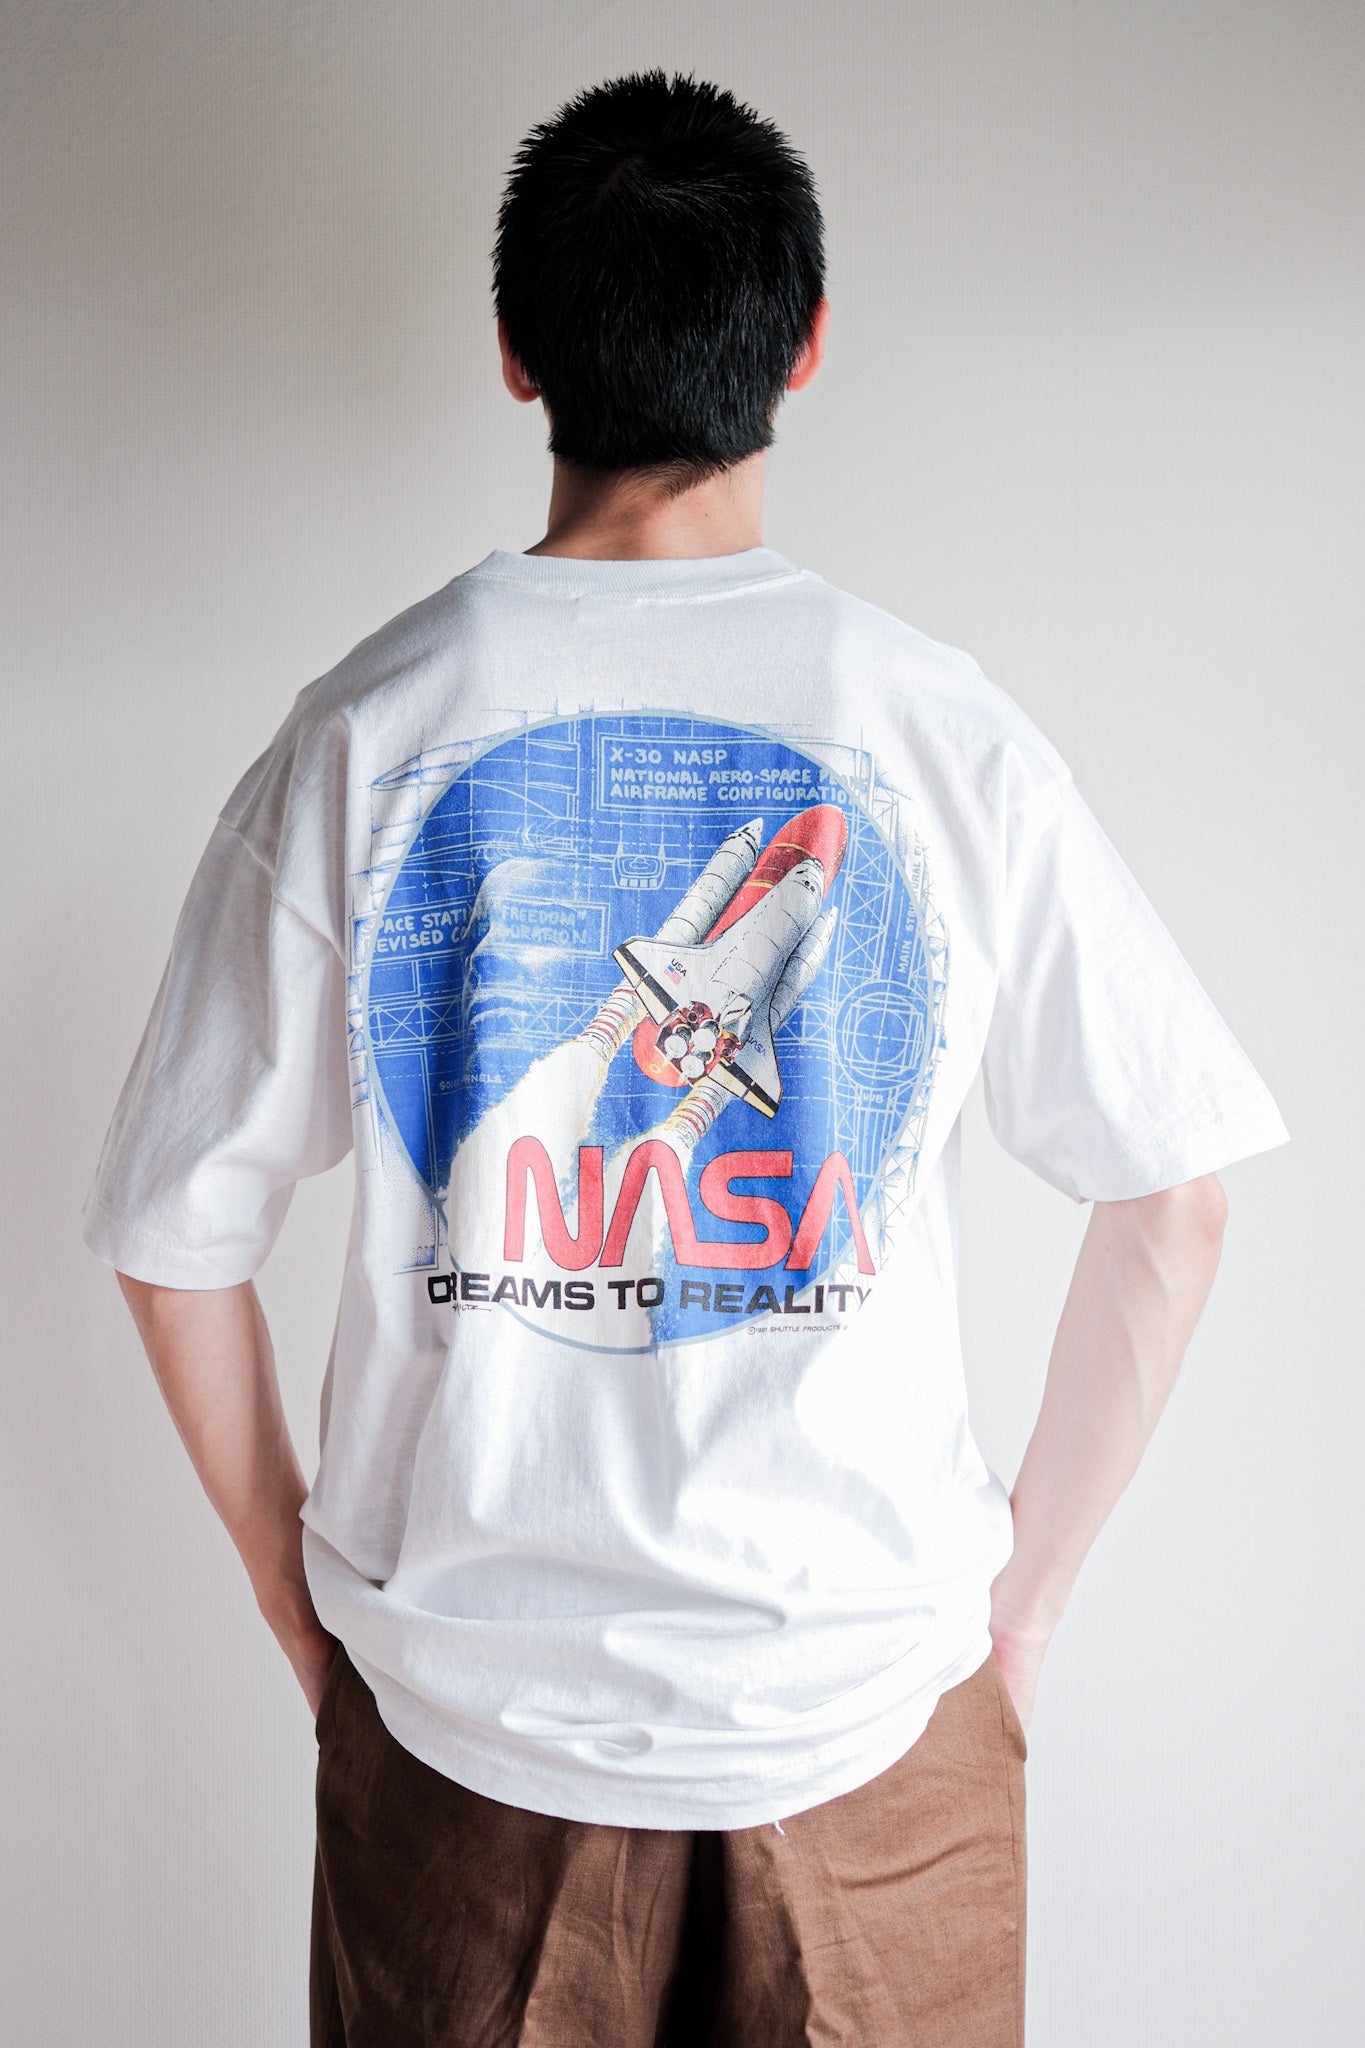 [~ 90's] Vintage Federal Print T-shirt size.xl "NASA" "Made in U.S.A."